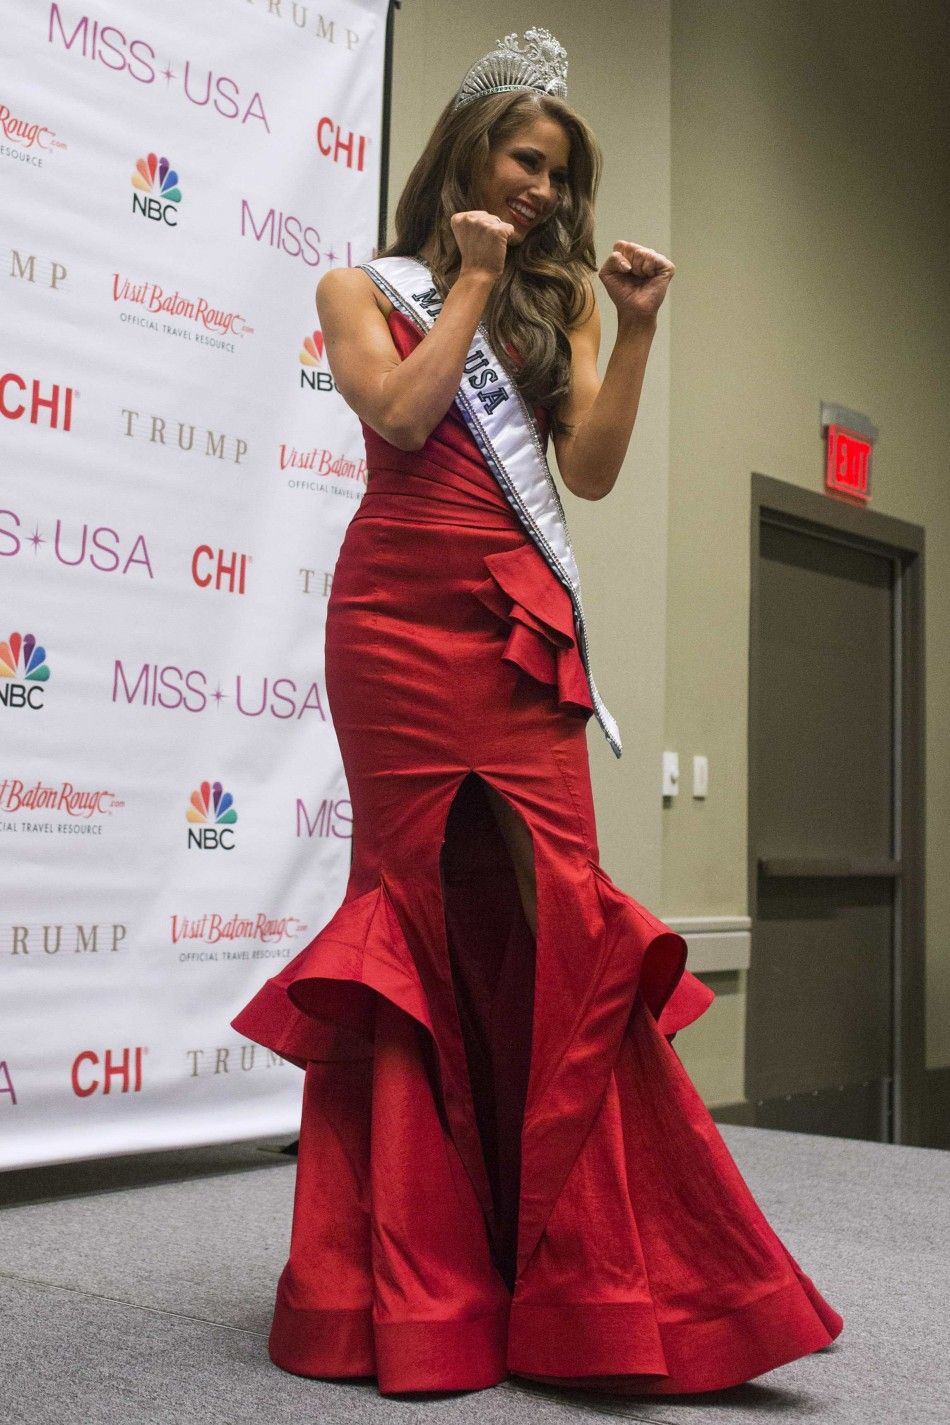 Miss Nevada Nia Sanchez poses in a taekwondo martial art stance for the media at a news conference after she won the 2014 Miss USA beauty pageant in Baton Rouge, Louisiana